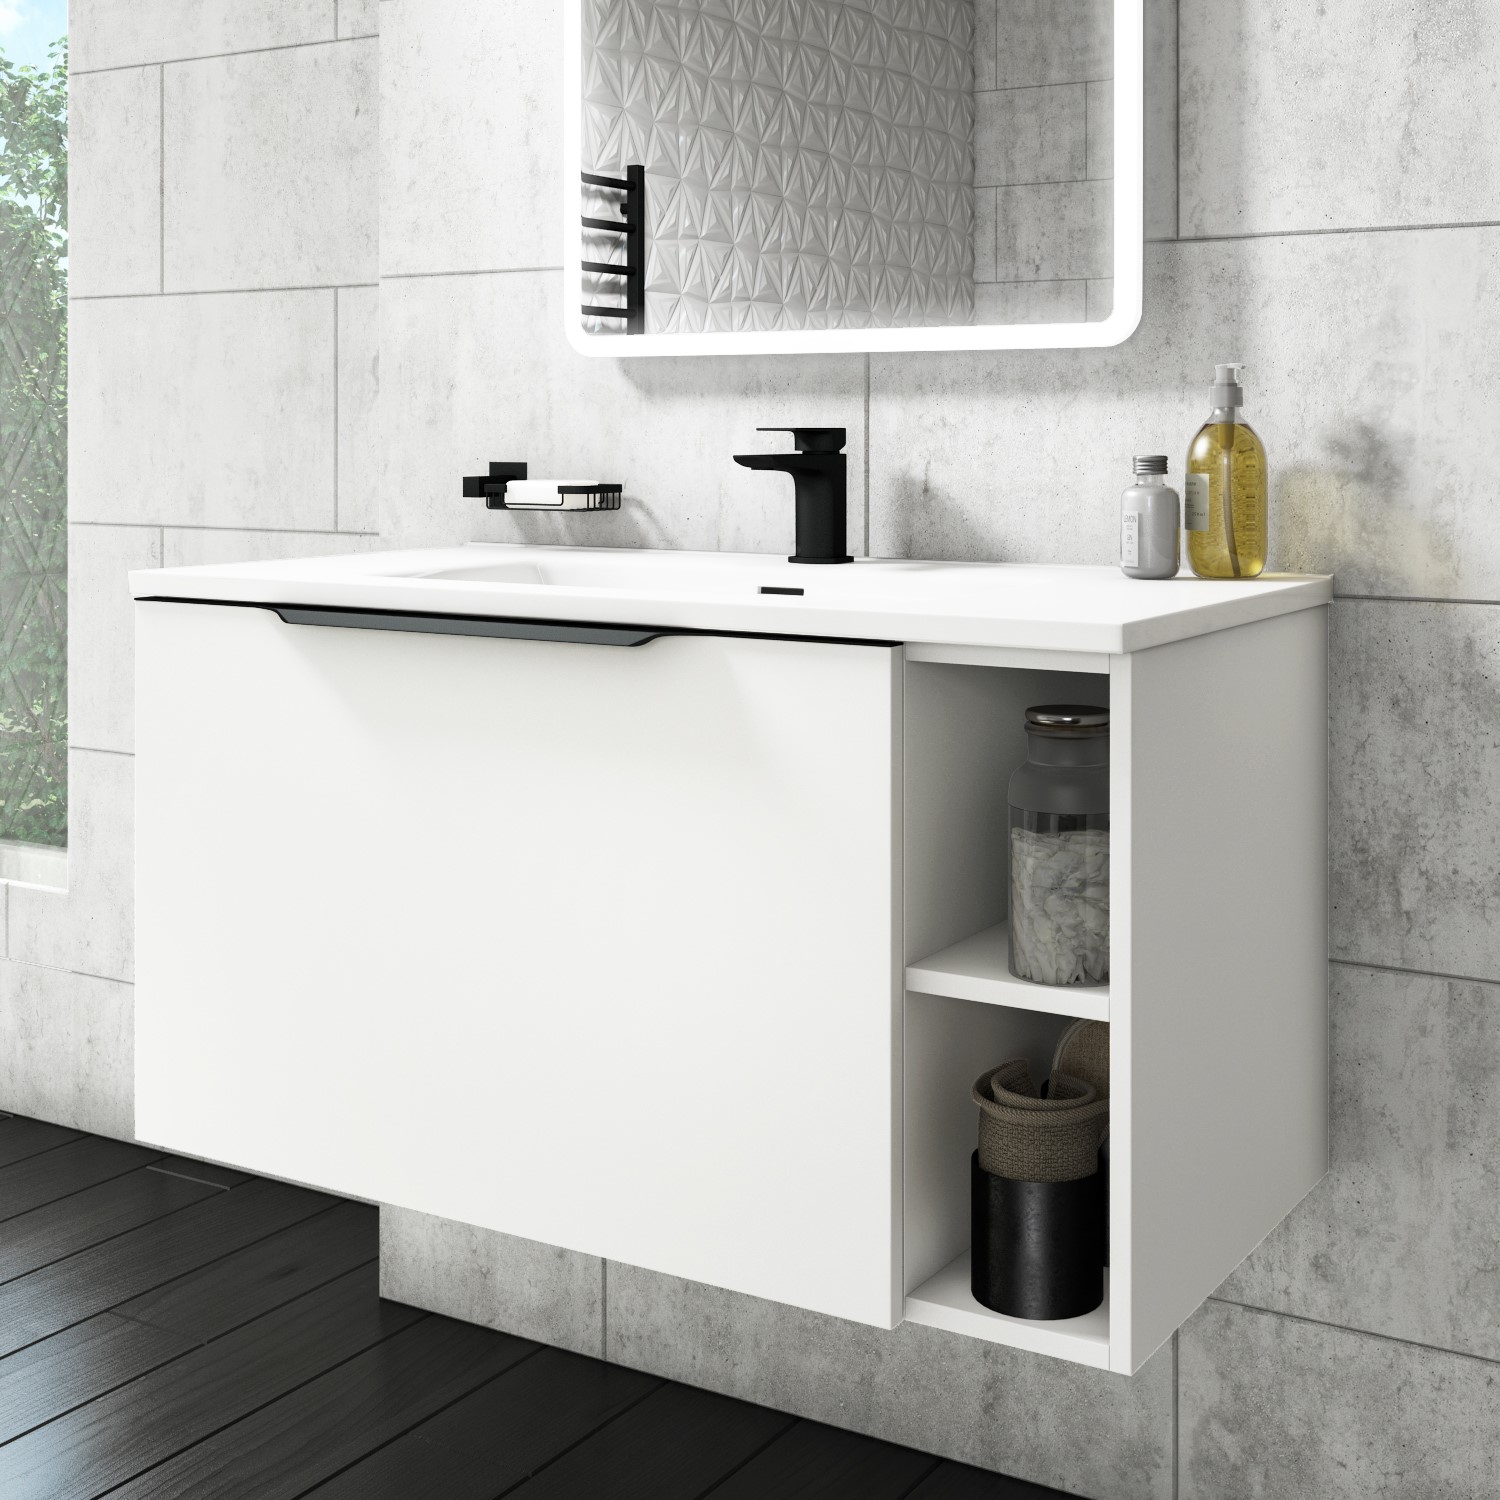 900mm White Wall Hung Vanity Unit With, Wall Mounted Vanity Units For Bathroom